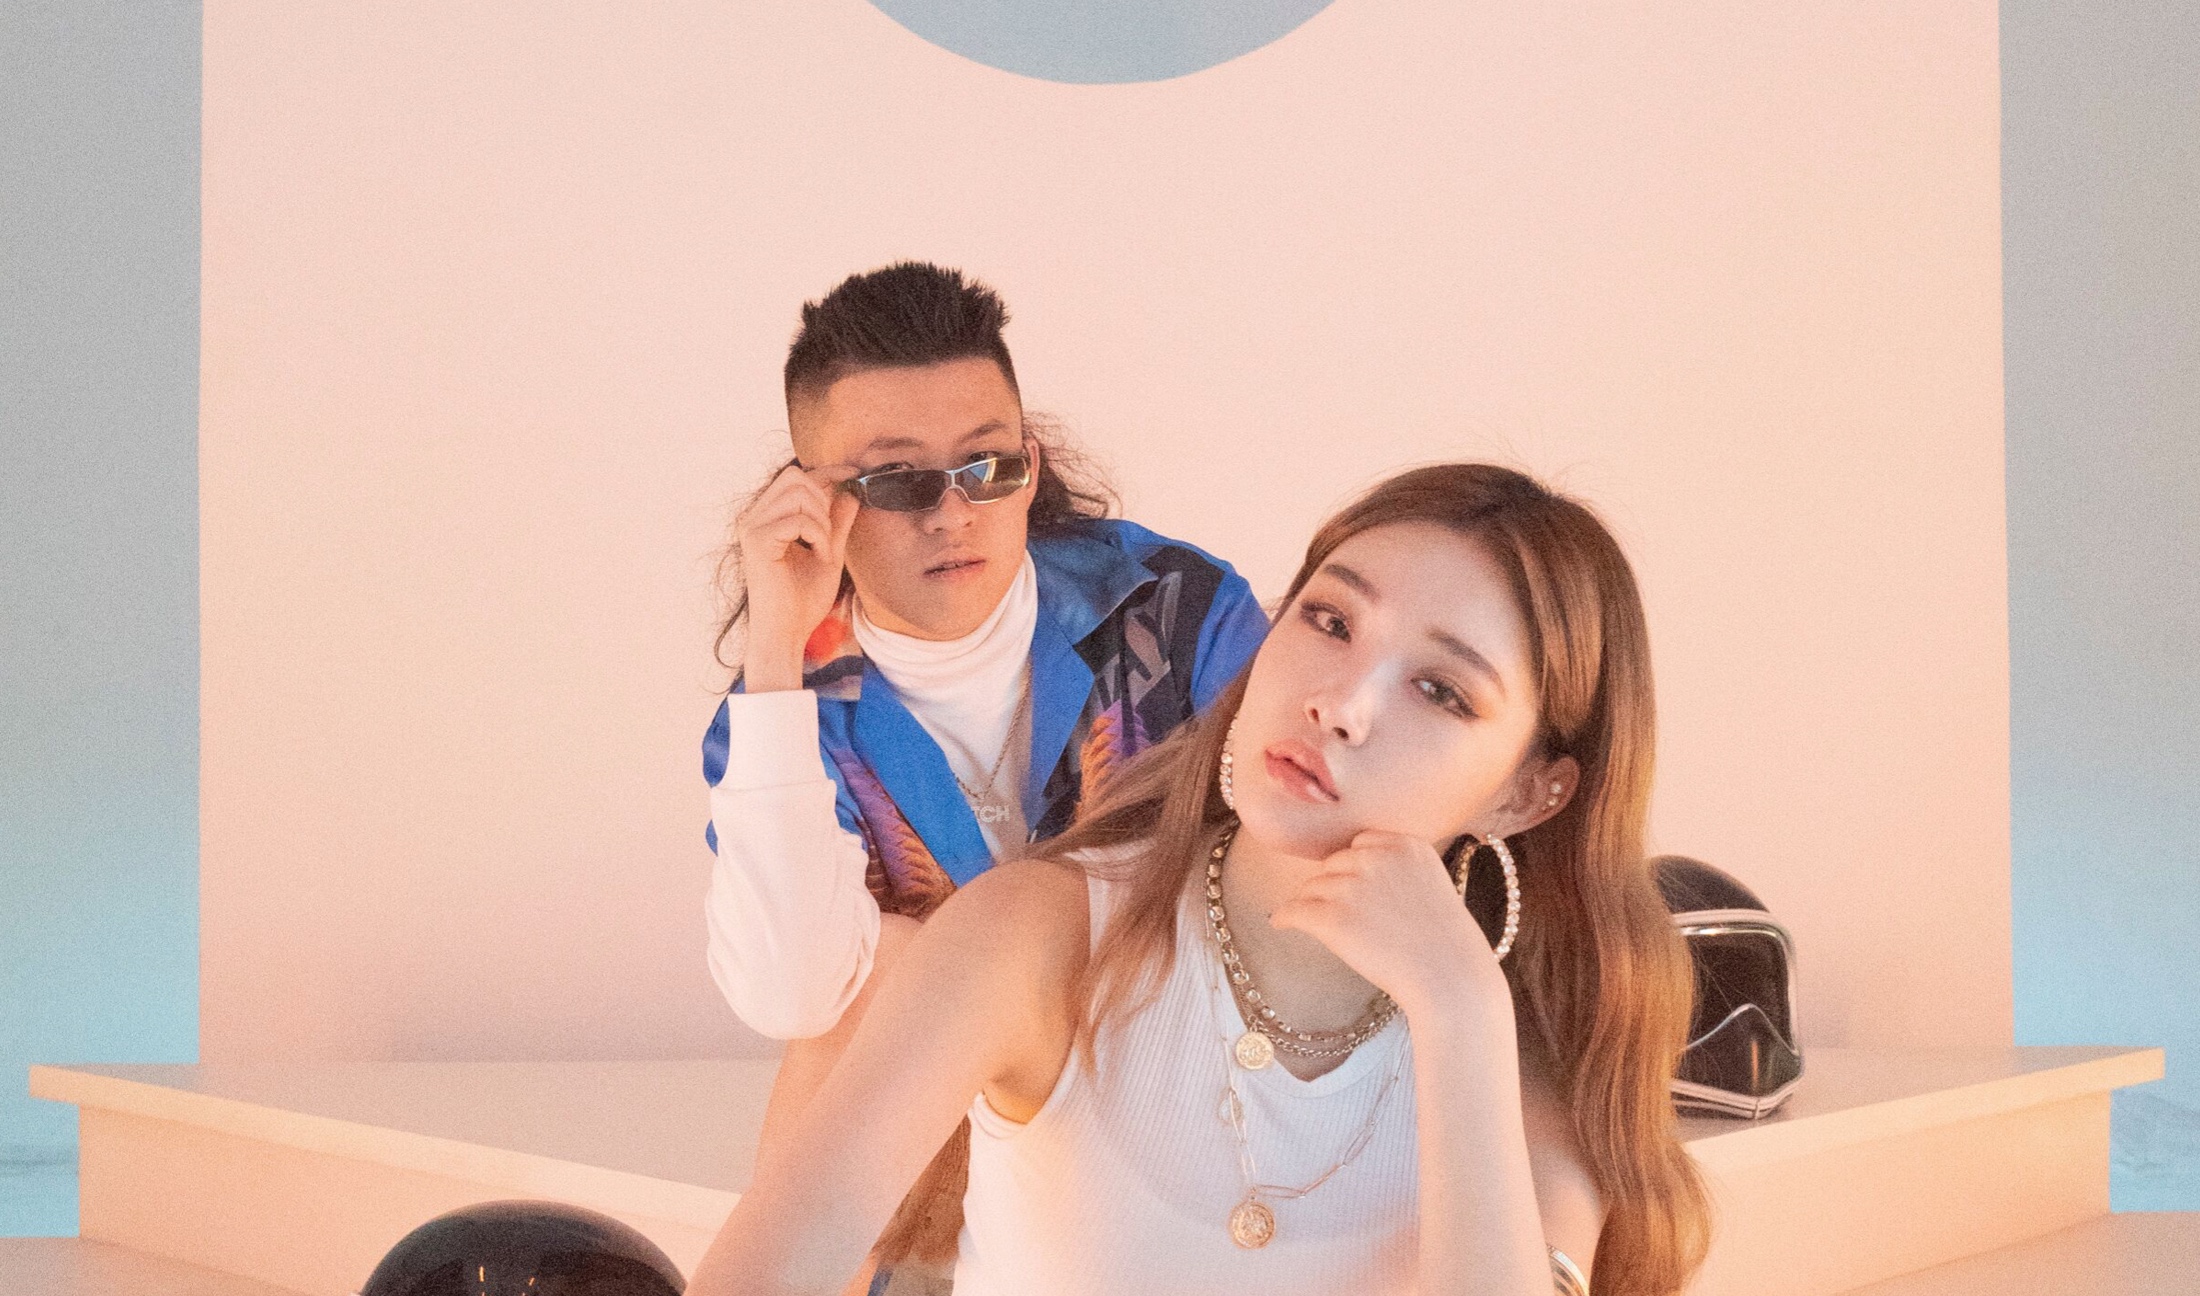 Rich Brian, Chung Ha: These Nights Review